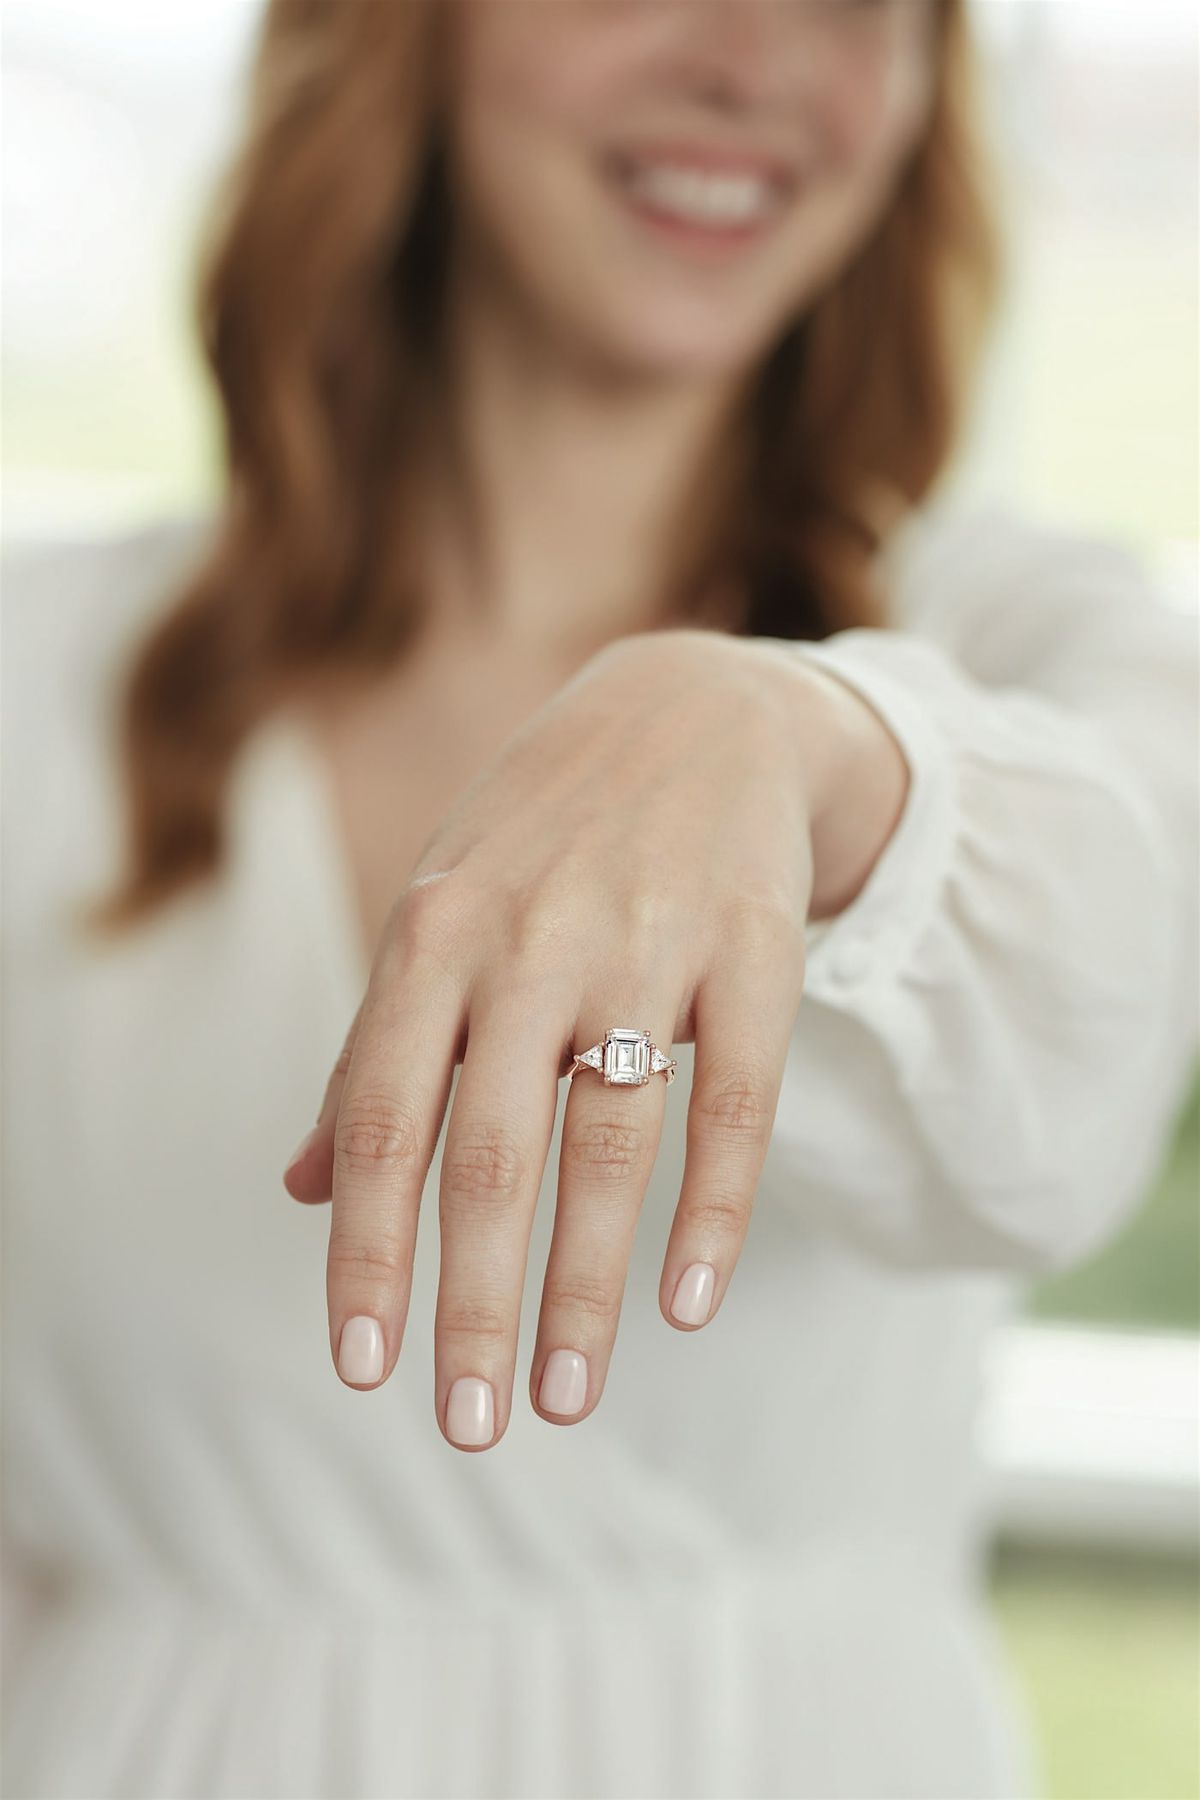 Ready to say " I DO " ?  Demystifying the engagement ring shopping